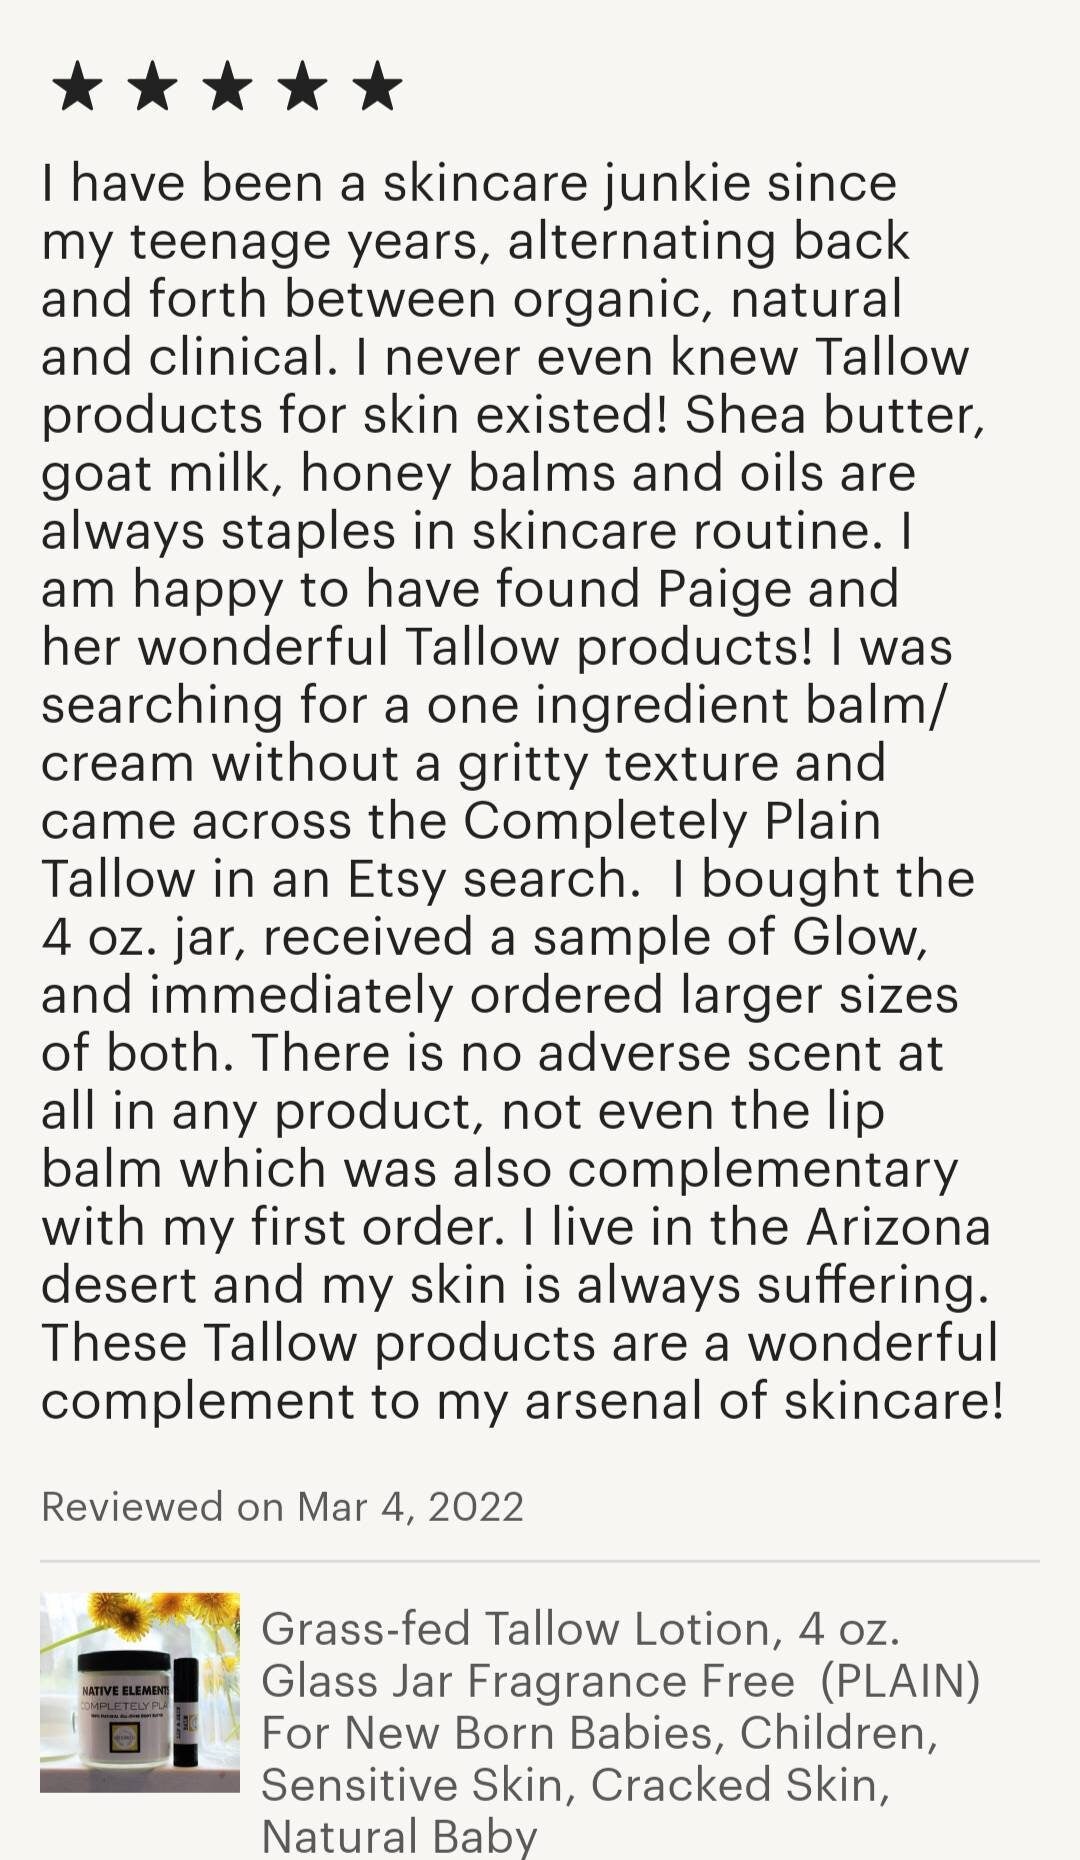 Grass-fed Tallow Lotion 